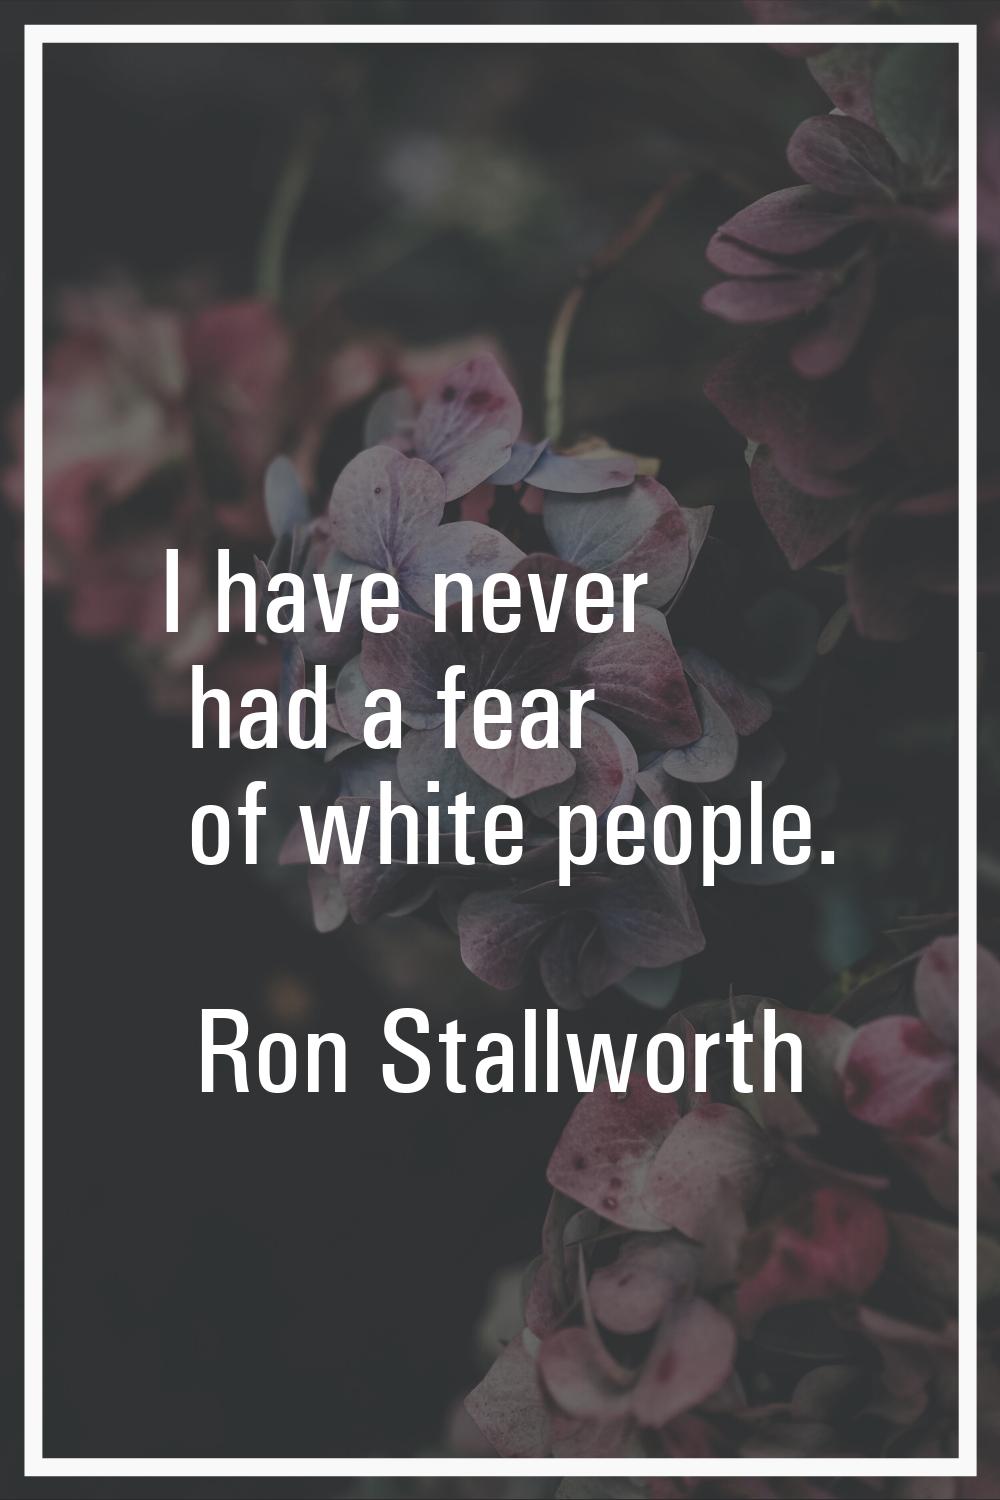 I have never had a fear of white people.